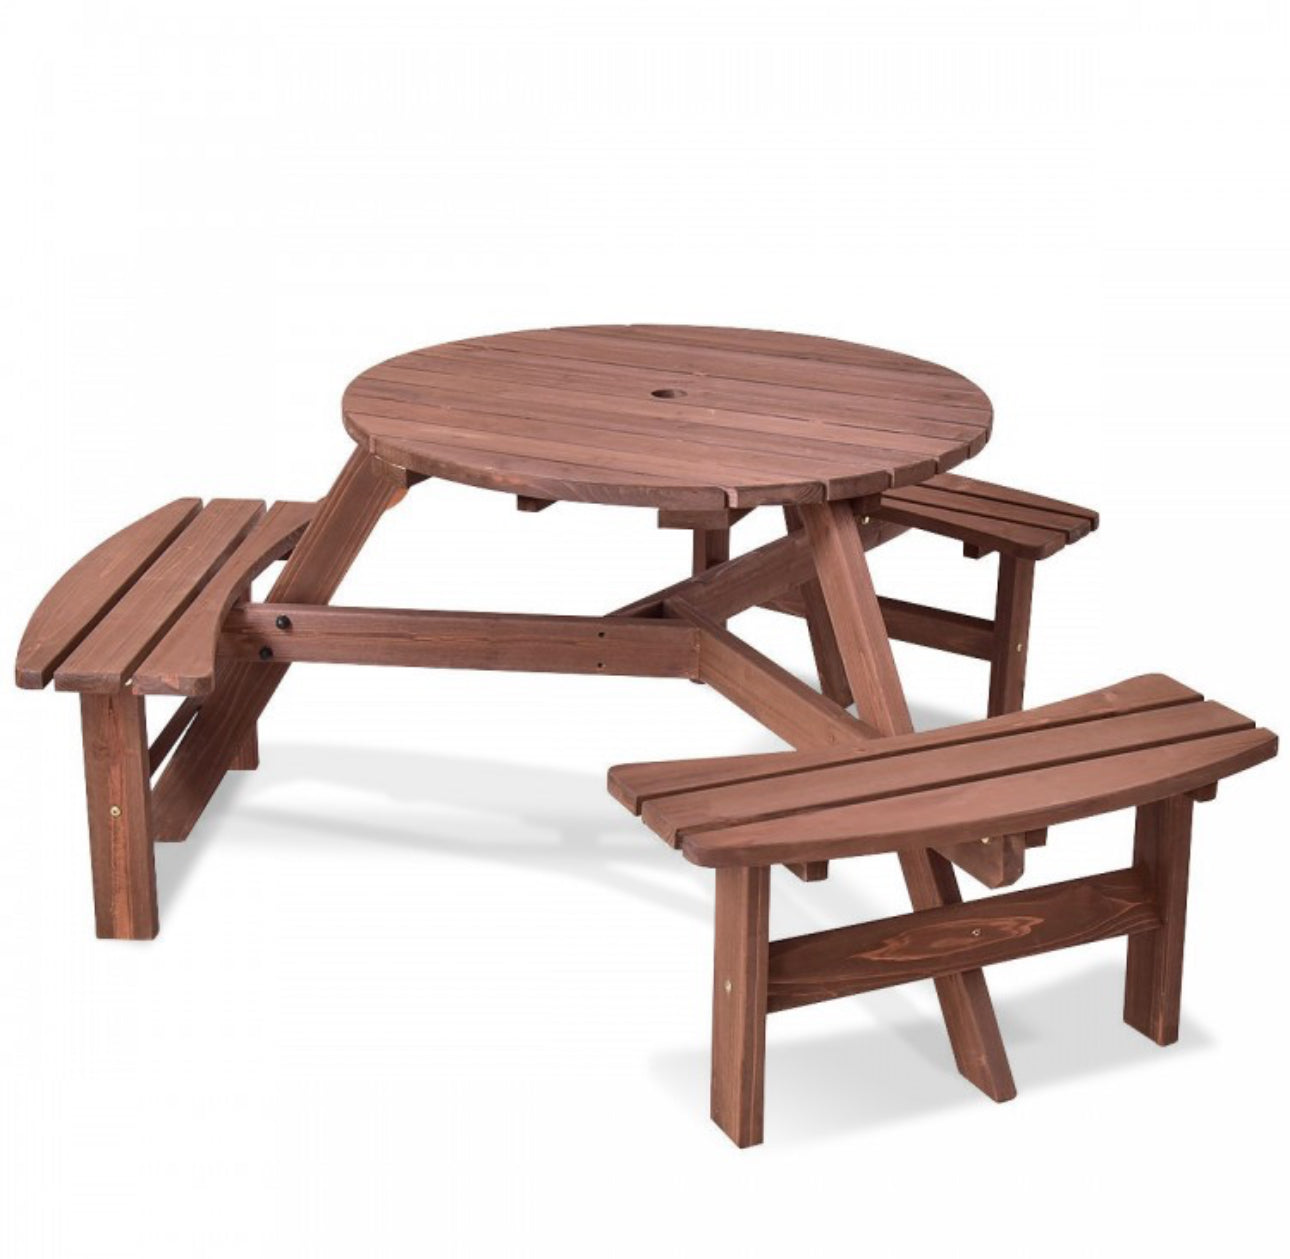 Super Elegant 6-Person Comfortable Wooden Patio Picnic Table With Bench And Umbrella Hold | Heavy Duty | For Patio, Garden, Terrace, Poolside